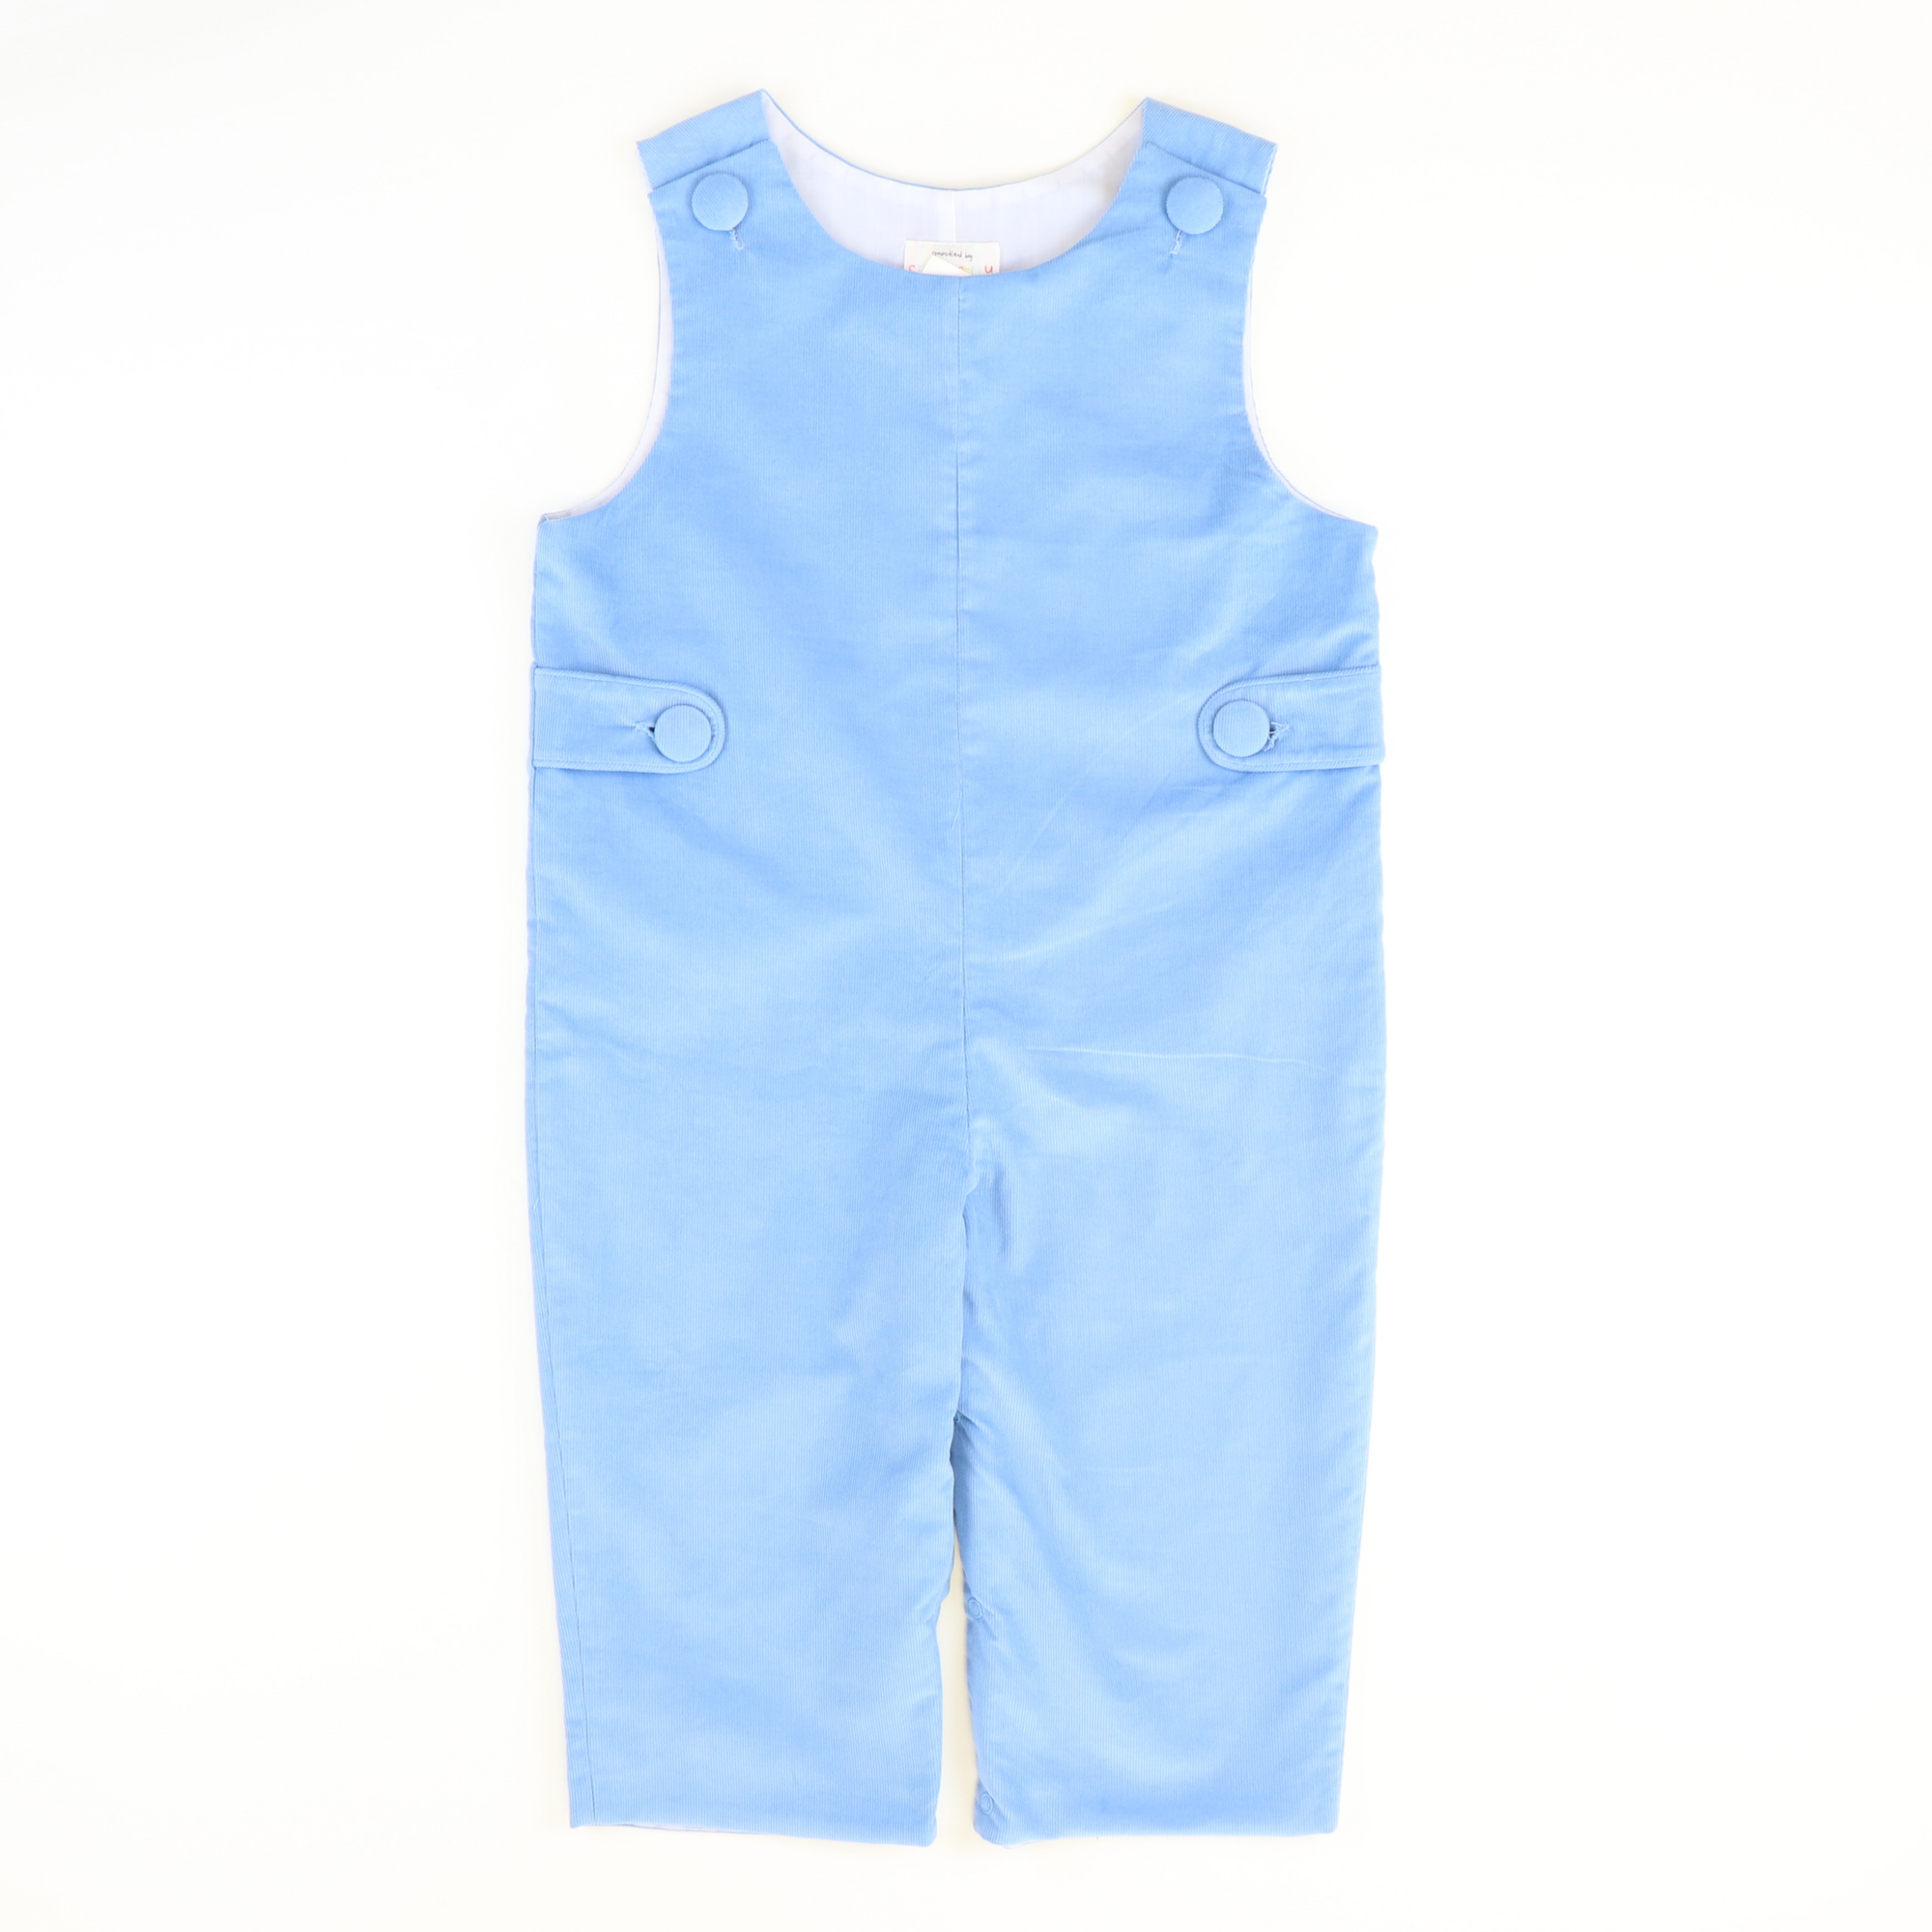 Signature Tab Longall - Party Blue Corduroy - Stellybelly